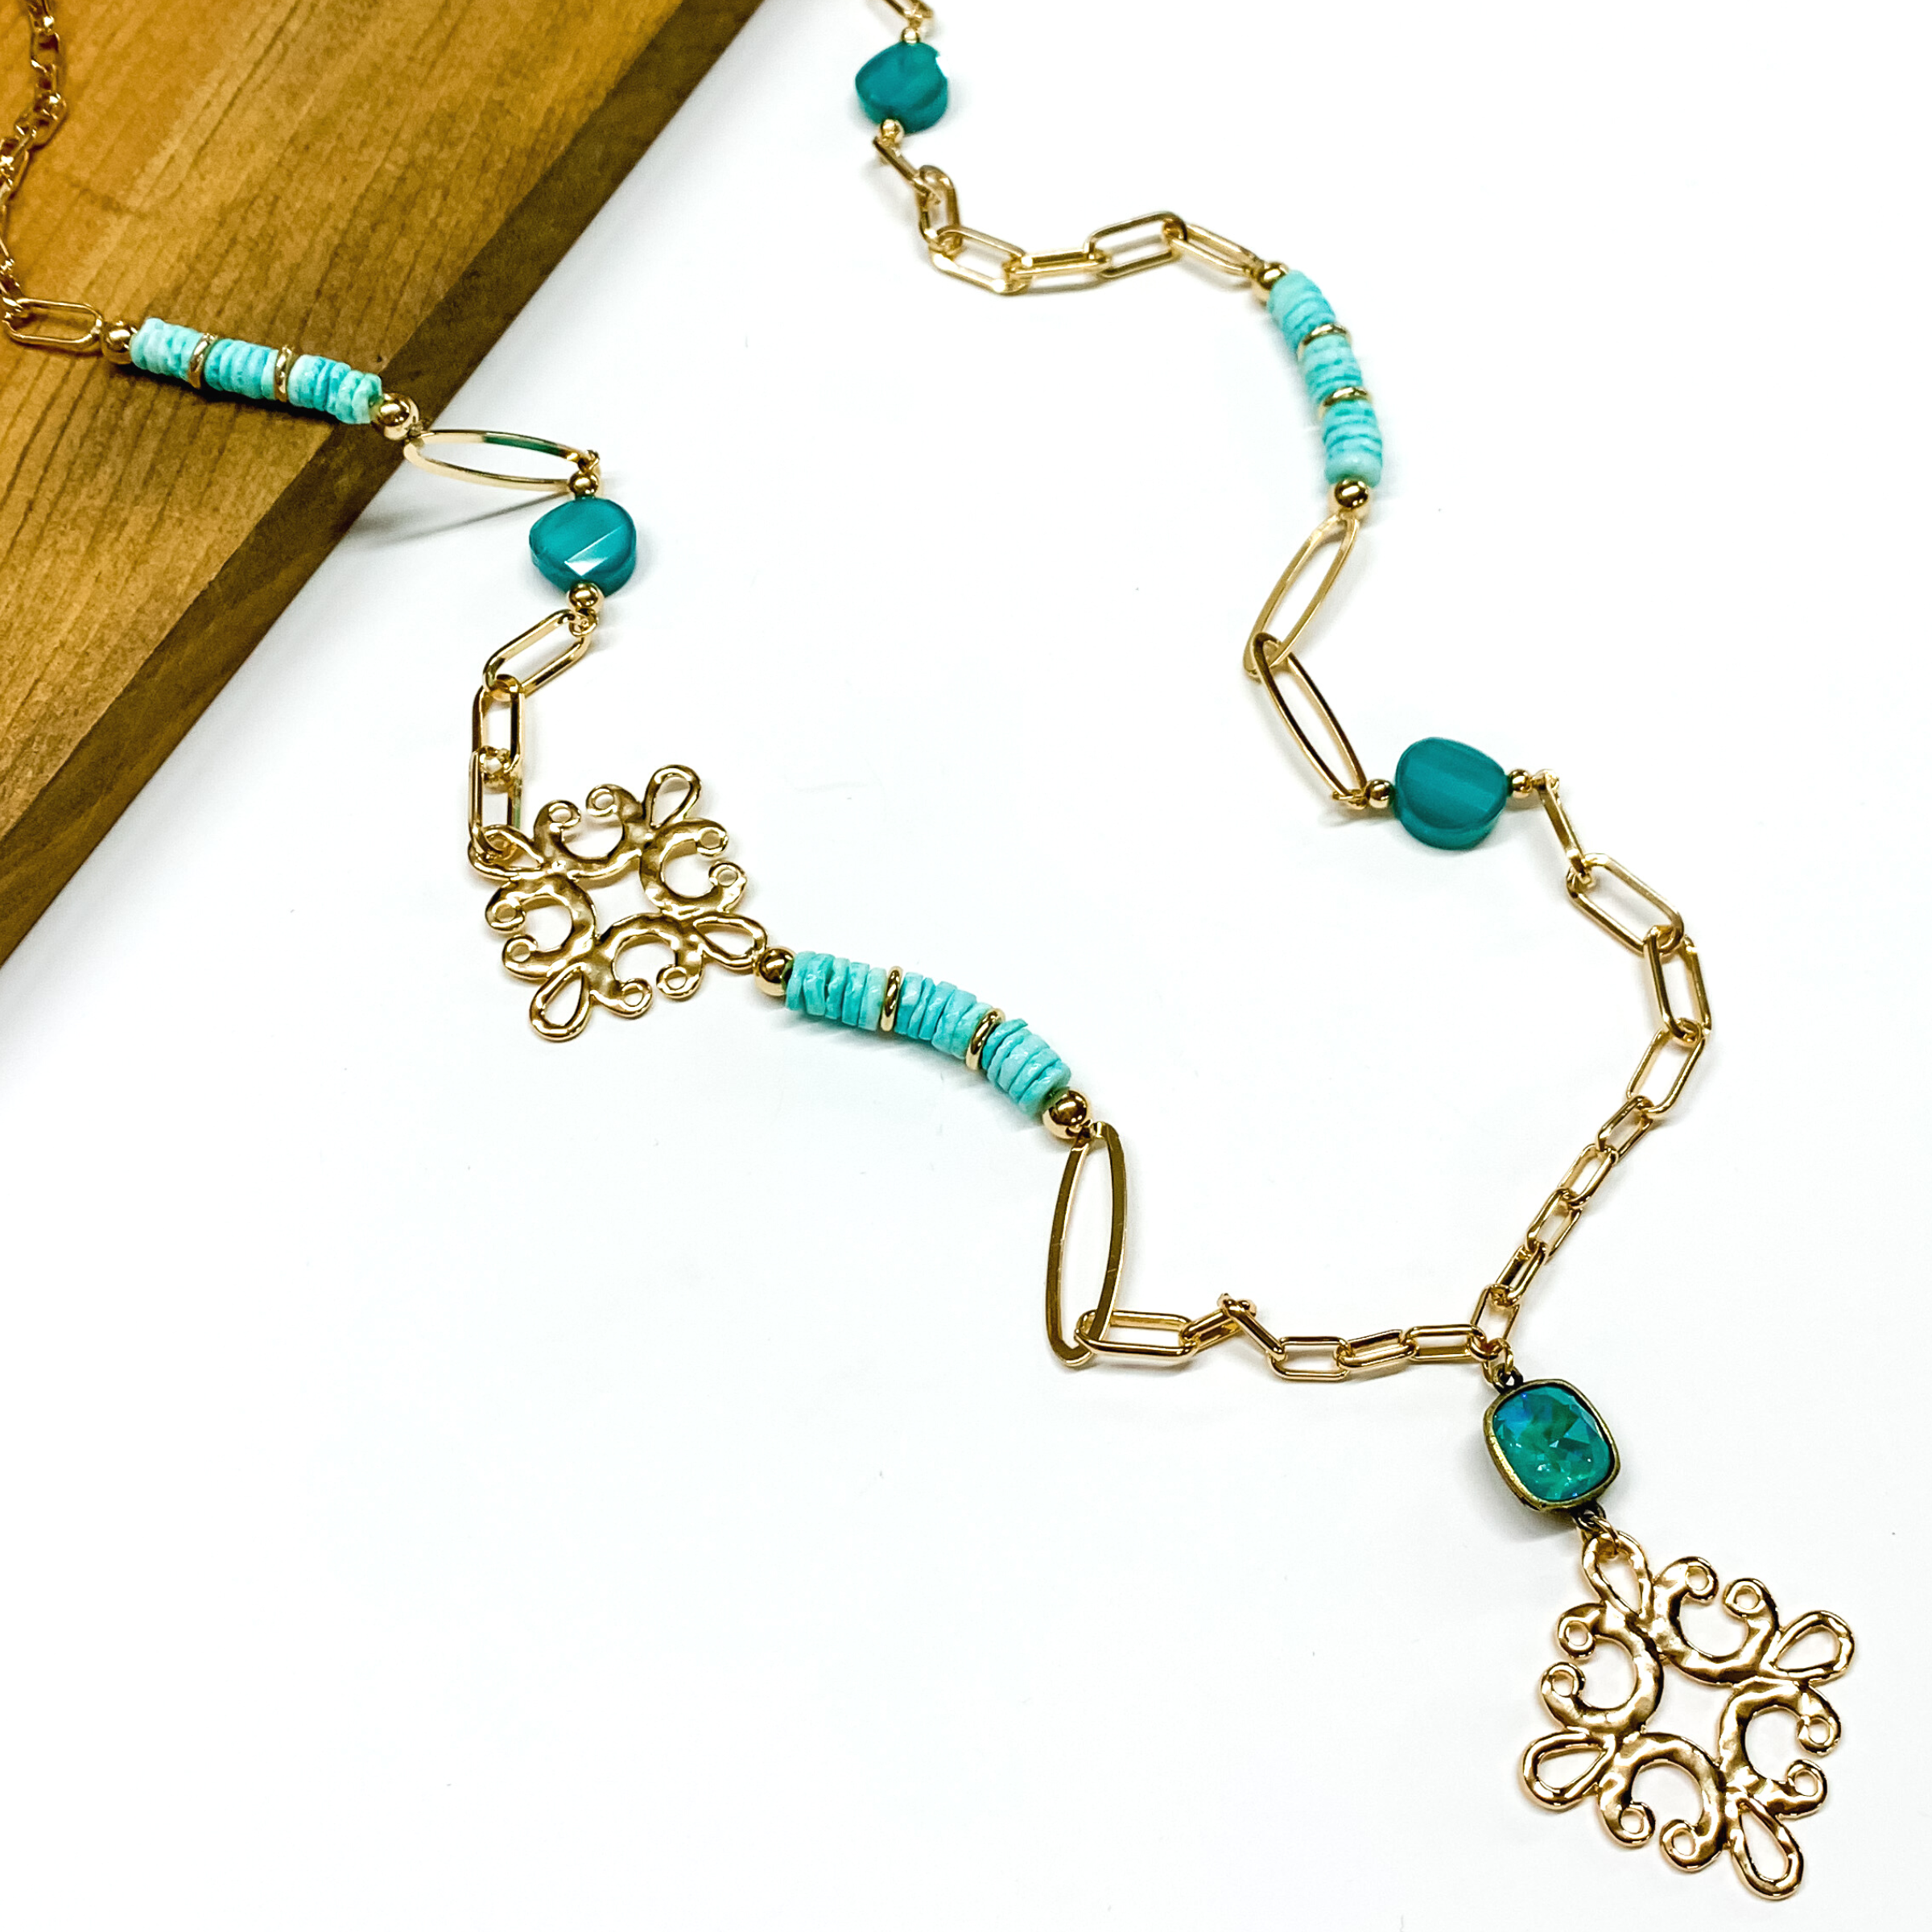 Gold paperclip chain and turqiose beaded necklace. This necklace also includes a turquoise crystal and gold quatrefoil drop. This necklace is pictured partially laying on a brown block on a white background. 